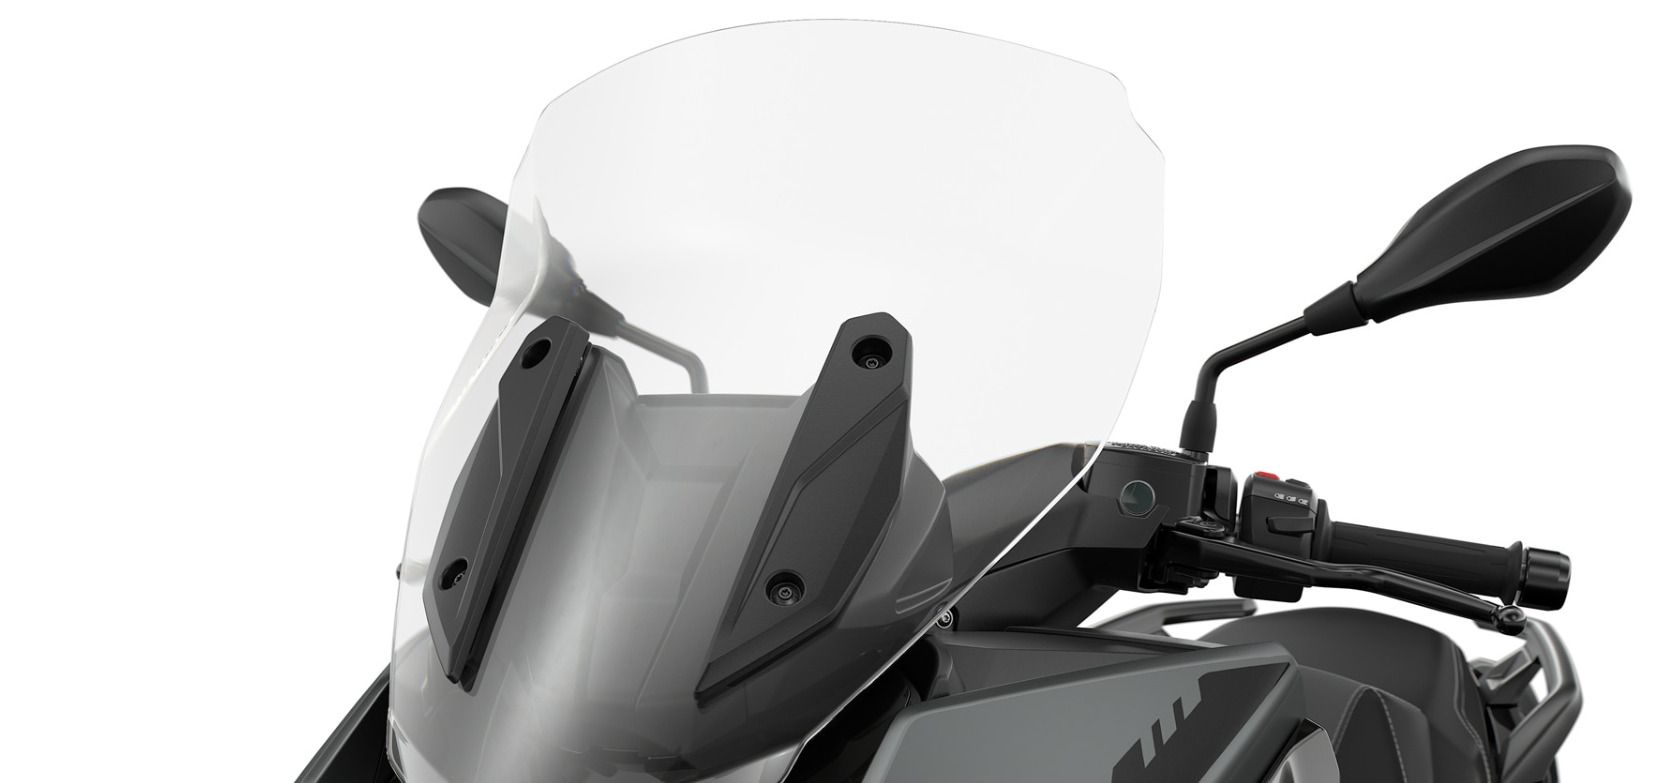 BMW C-Series C 400 GT - Windshield protects from the elements